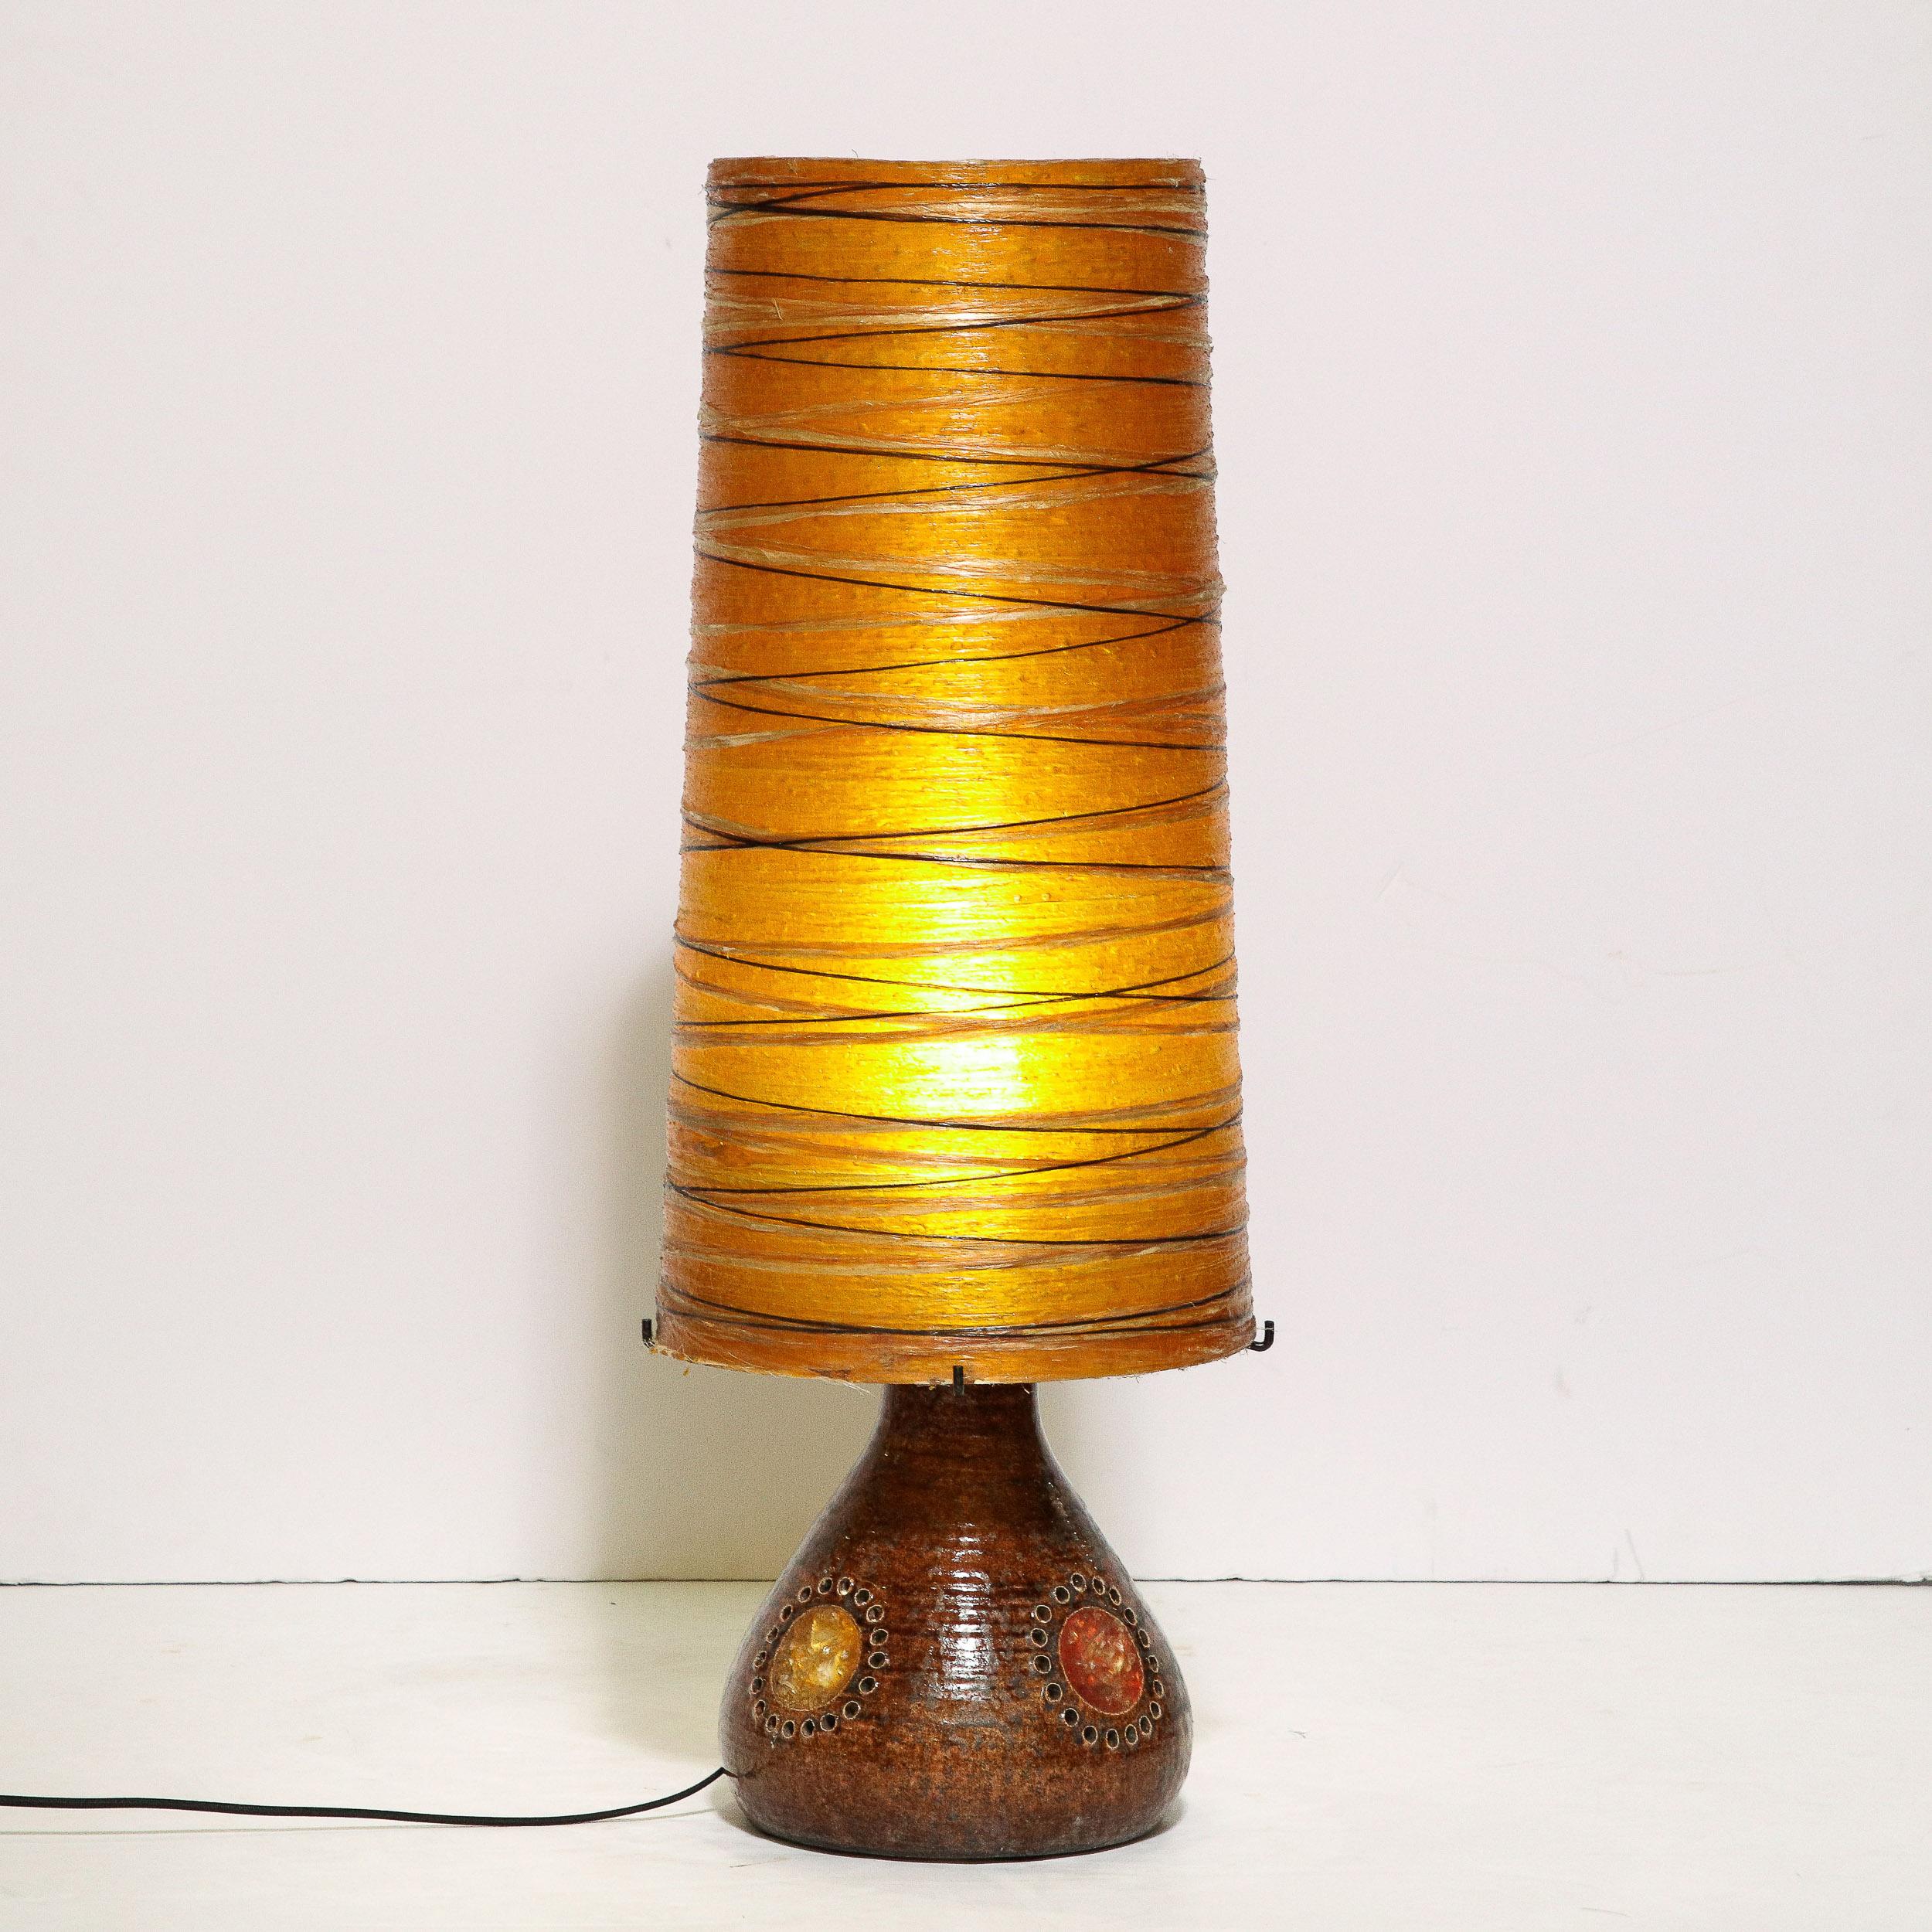 Midcentury Brutalist Ceramic Table Lamp with Horizontally Striated Resin Shade For Sale 3